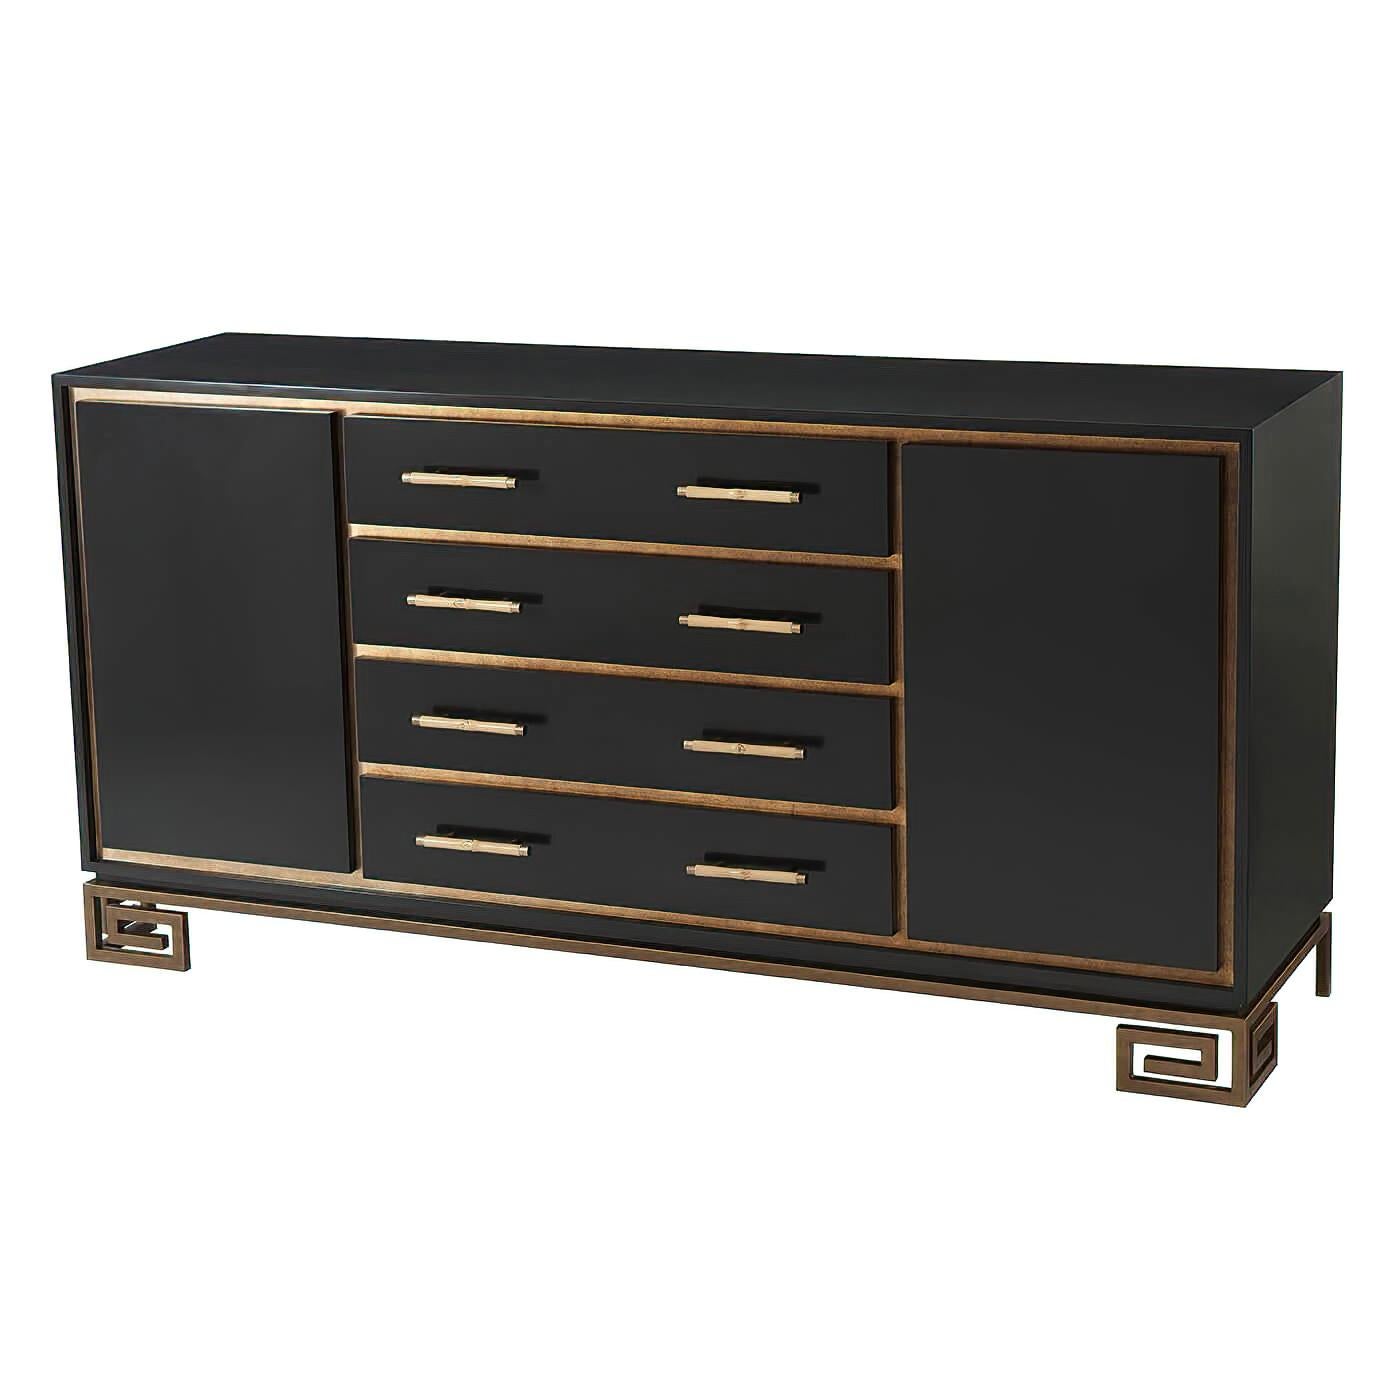 Art Deco style jet black lacquered cabinet with four recessed gilt frame drawers in the center, flanked by two cabinet ends with doors enclosing adjustable shelves with natural bamboo handles with brass tips on antiques gilded steel 